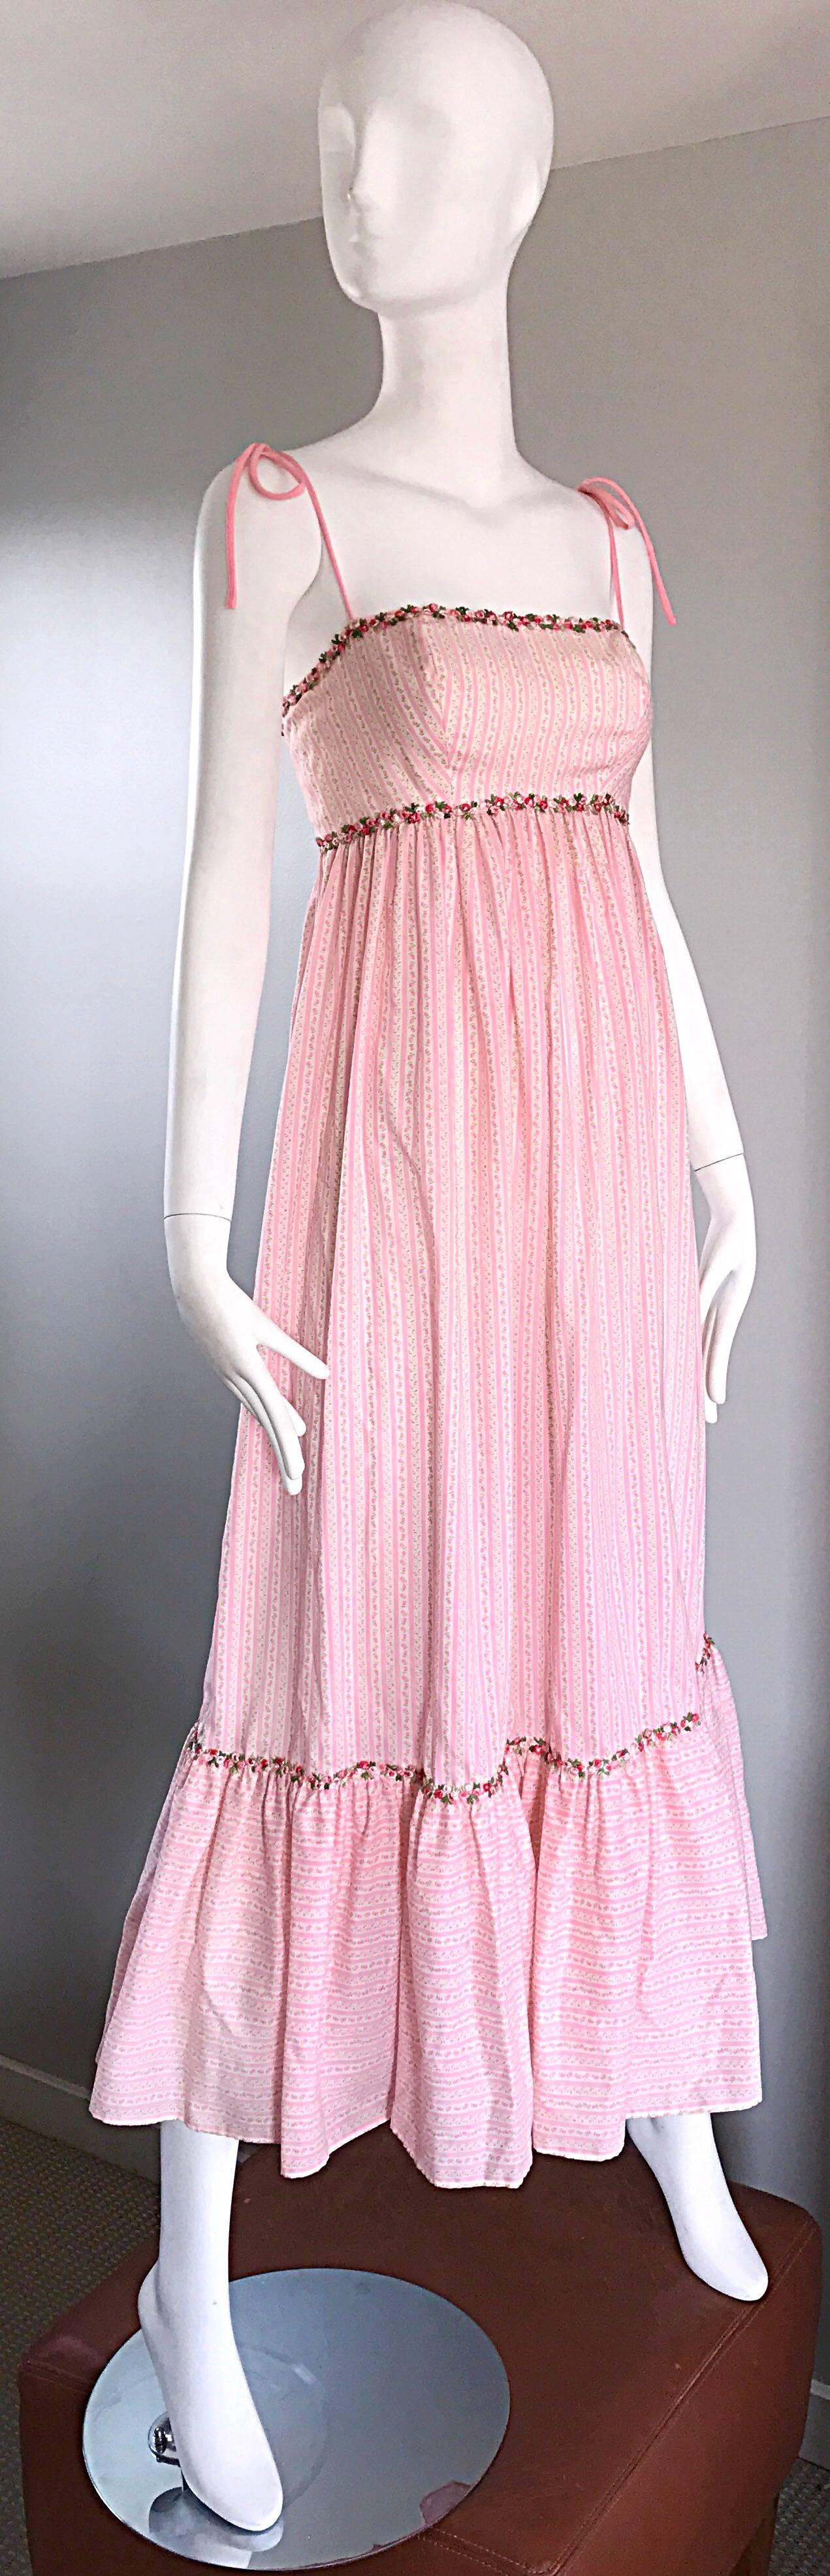 1970s Jay Morley for Fern Viollete Vintage Rose Print Pink + White Maxi Dress  In Excellent Condition For Sale In San Diego, CA